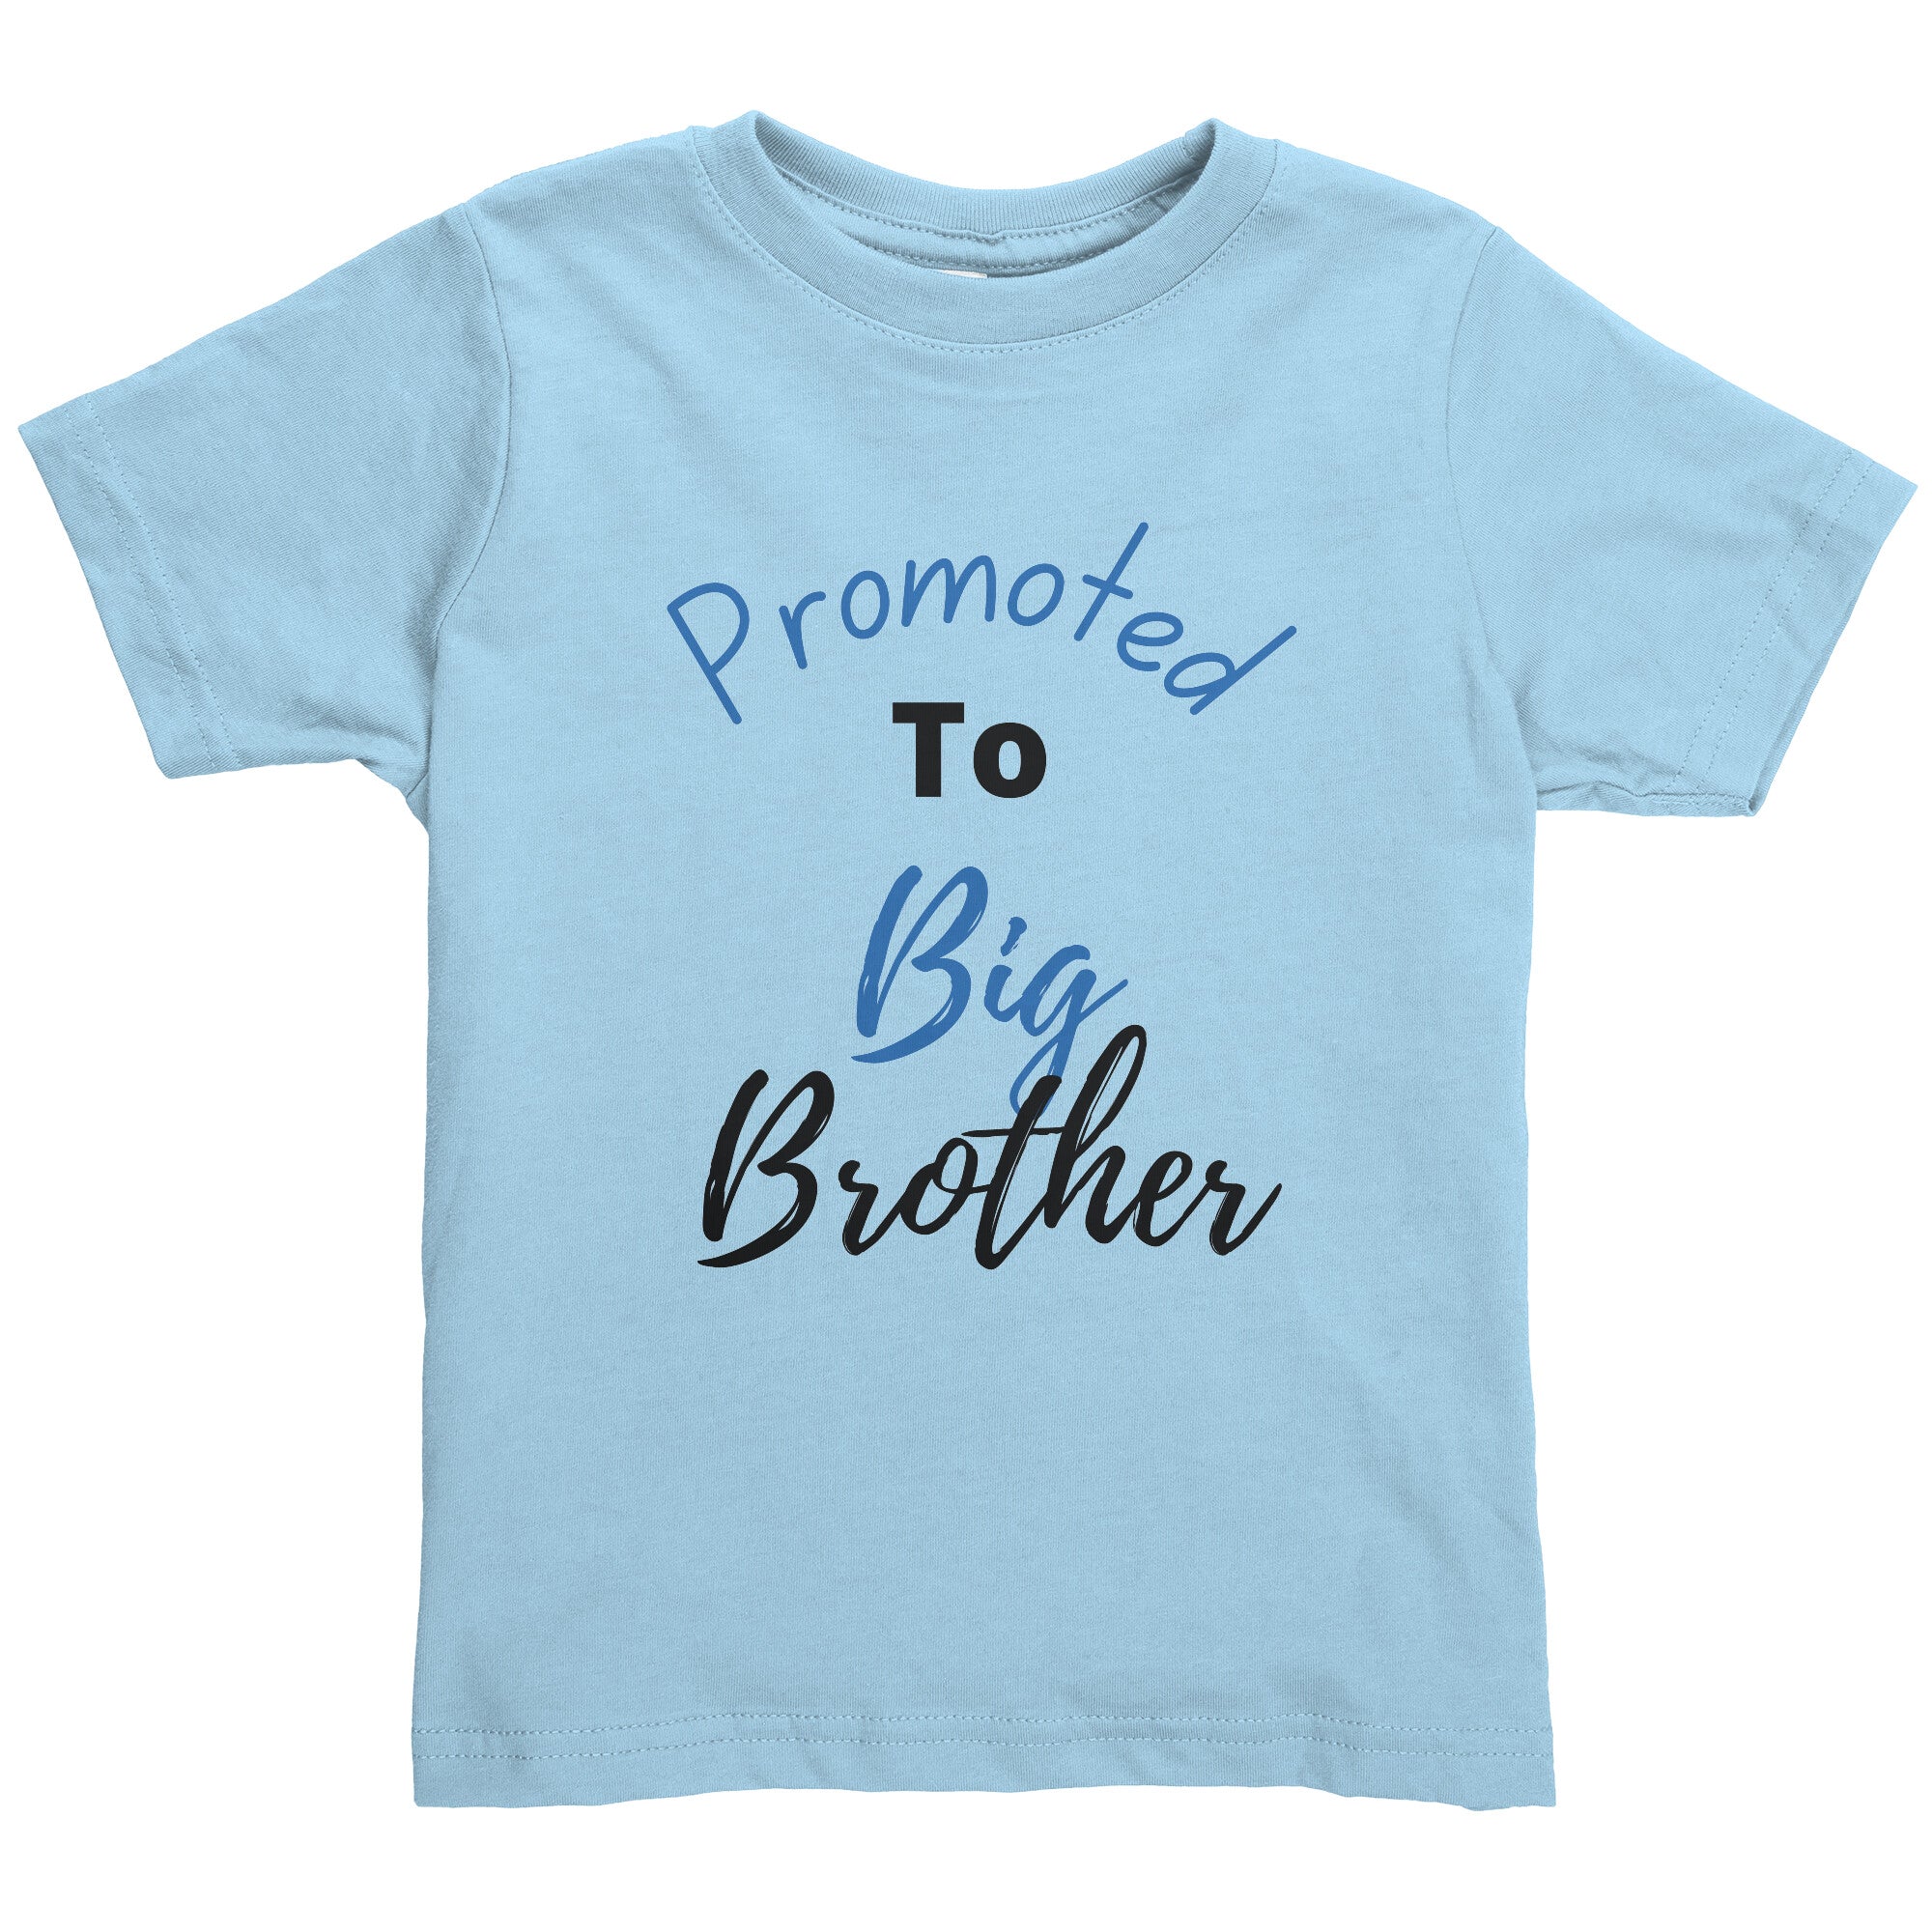 Promoted to Big Brother Toddler Shirt